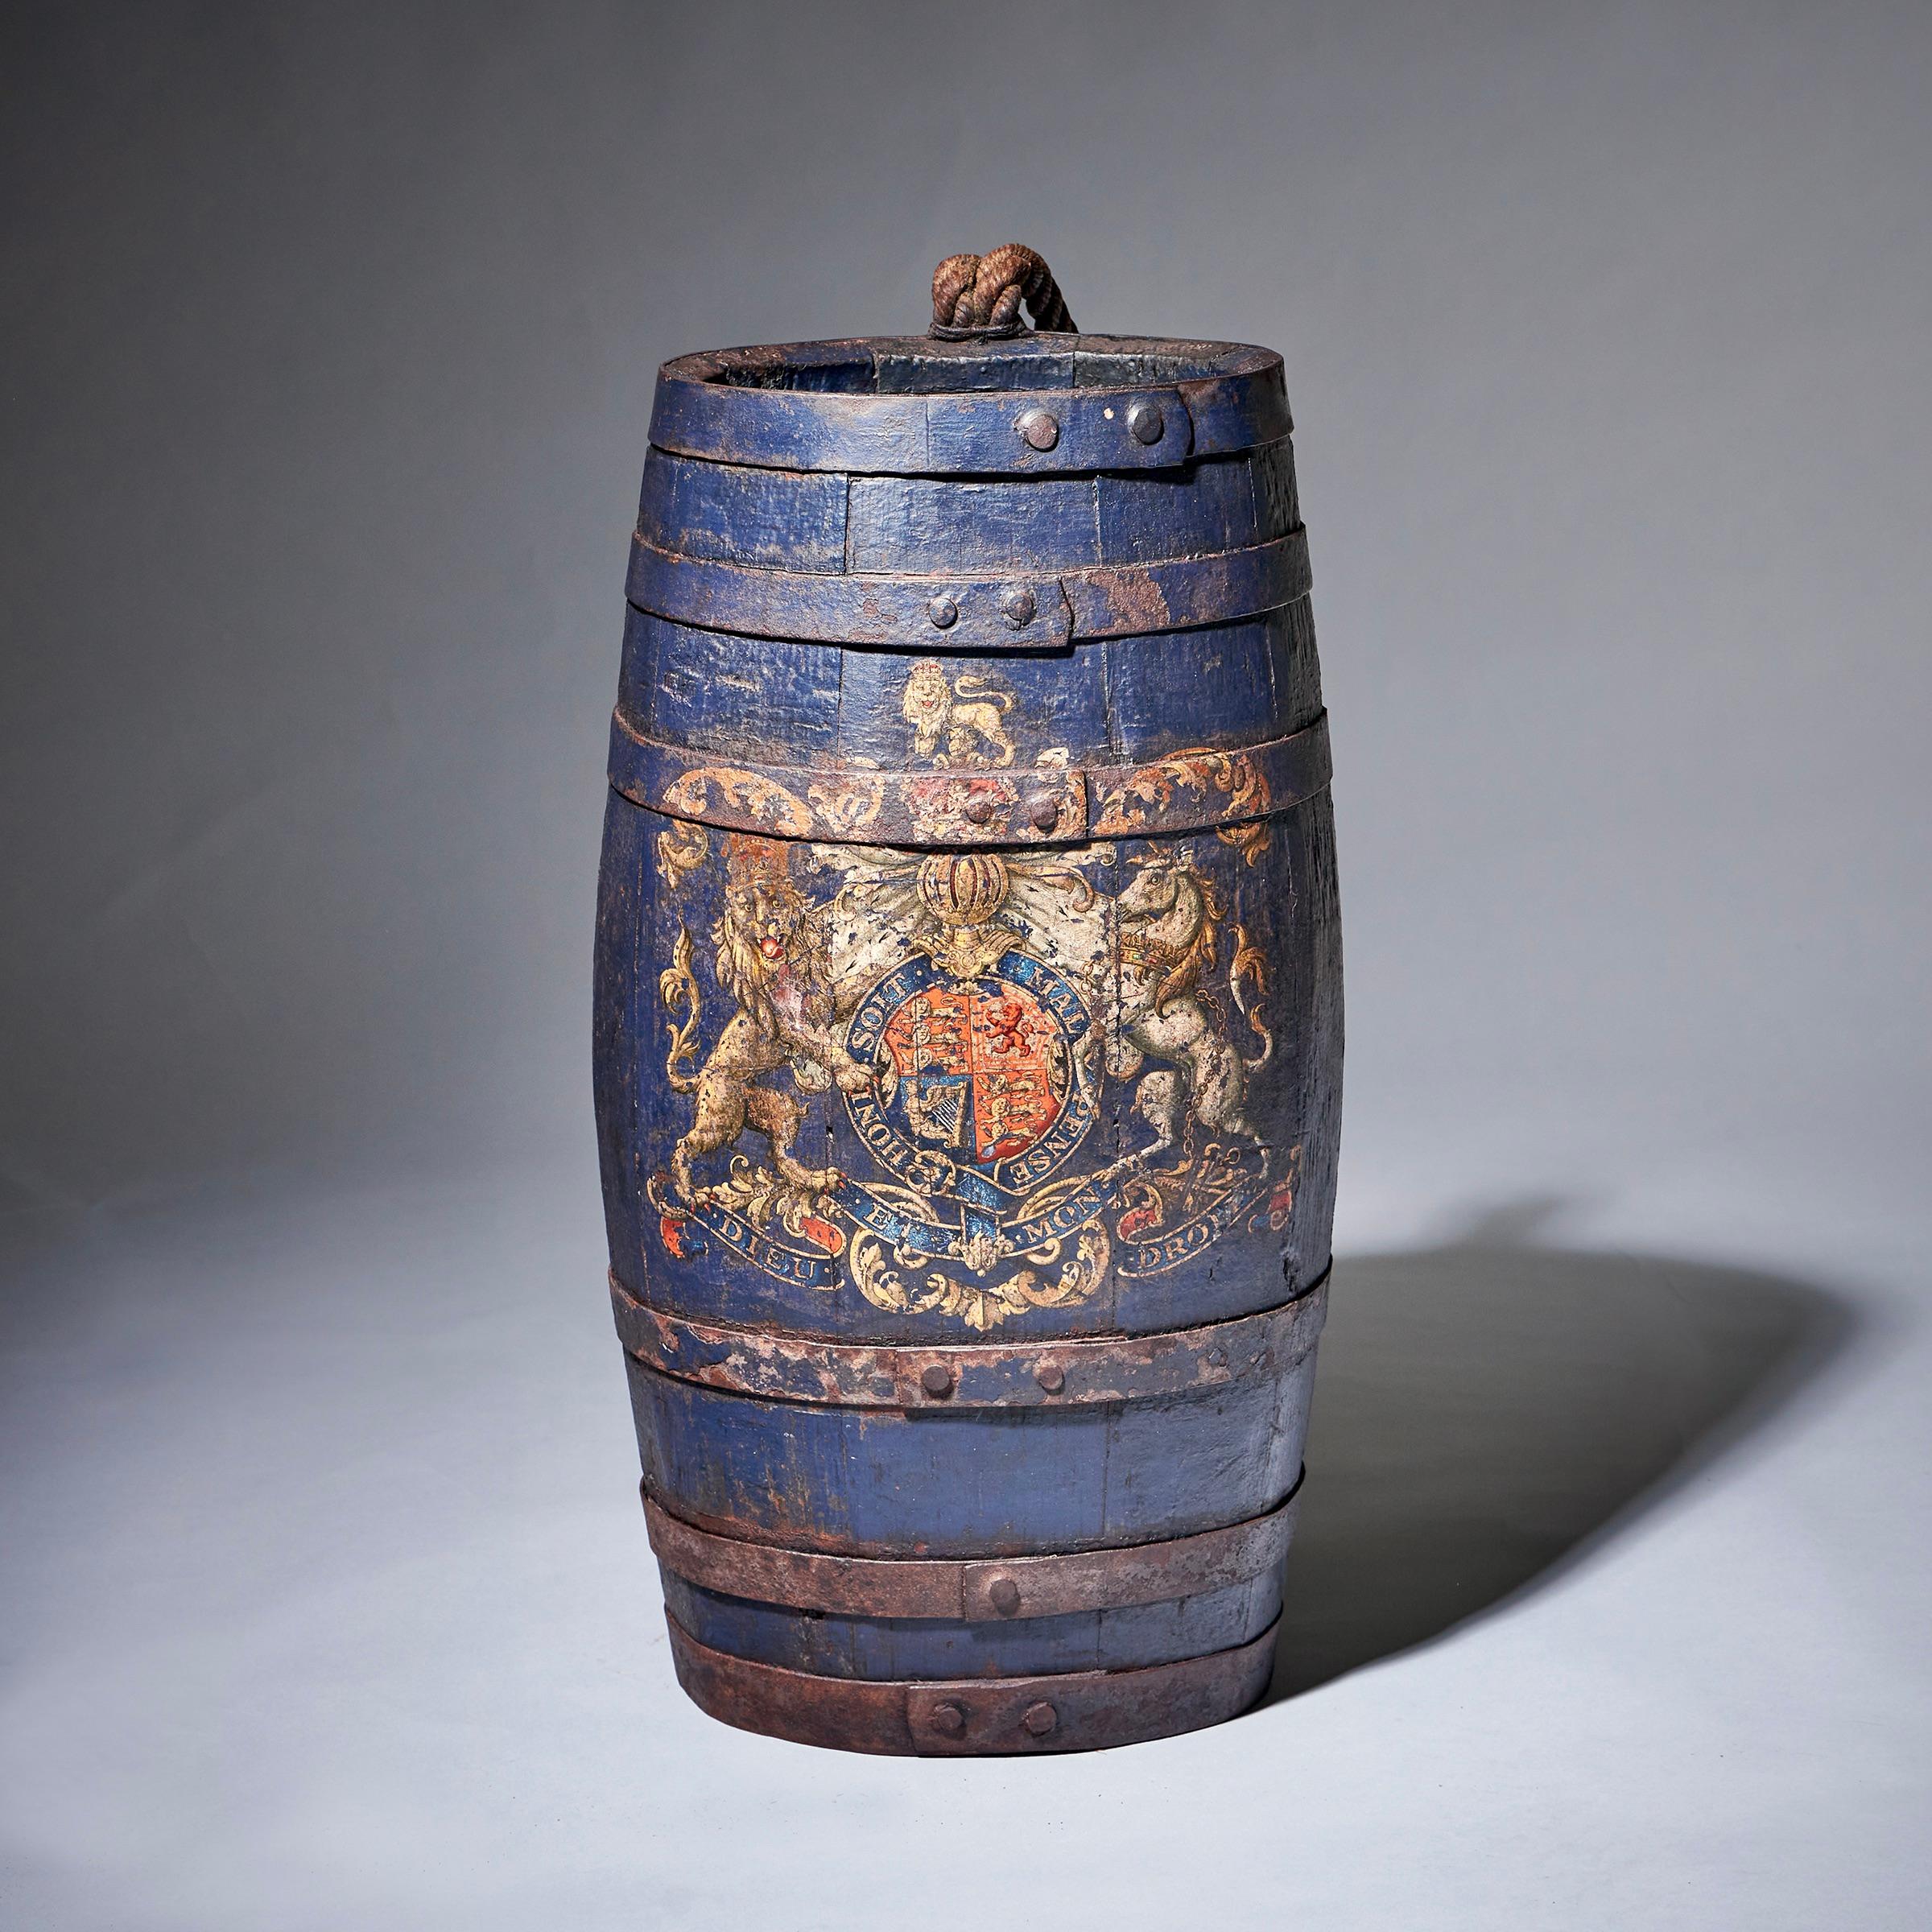 Georgian Rare Royal 18th Century Powder Barrel Stick Stand Decorated with a Coat of Arms